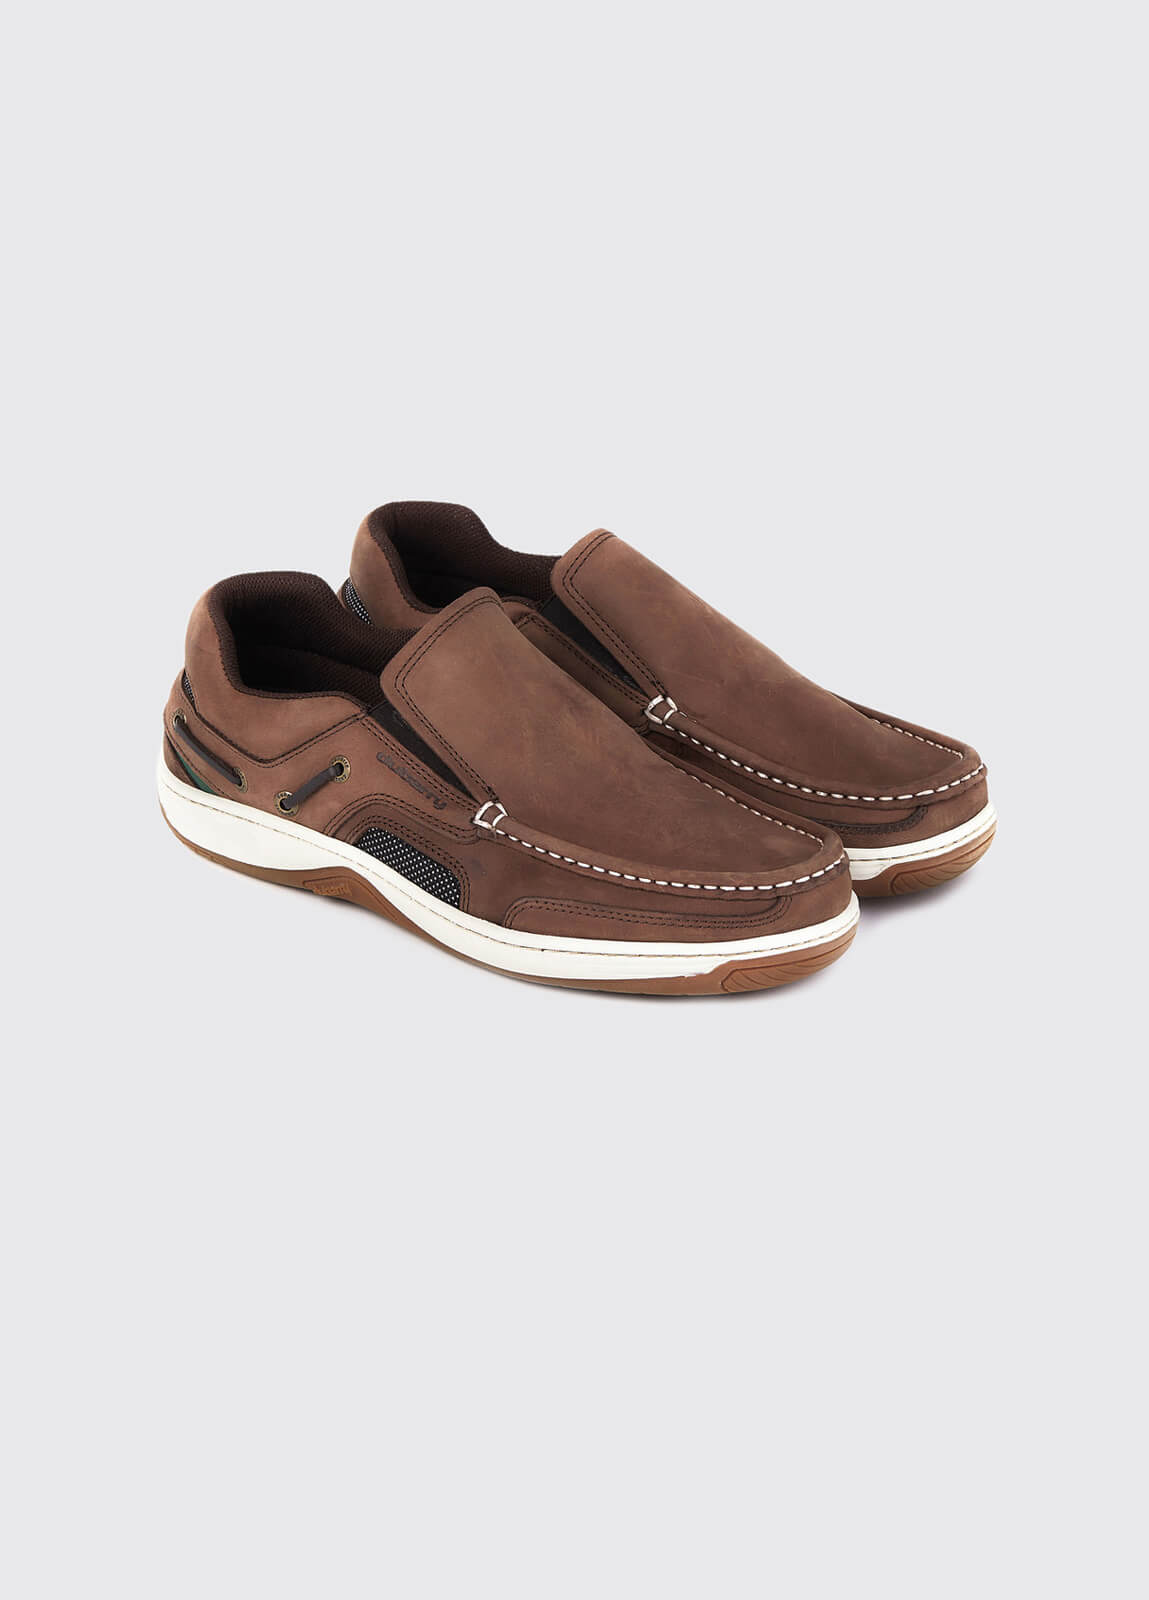 Yacht Loafer - Donkey Brown